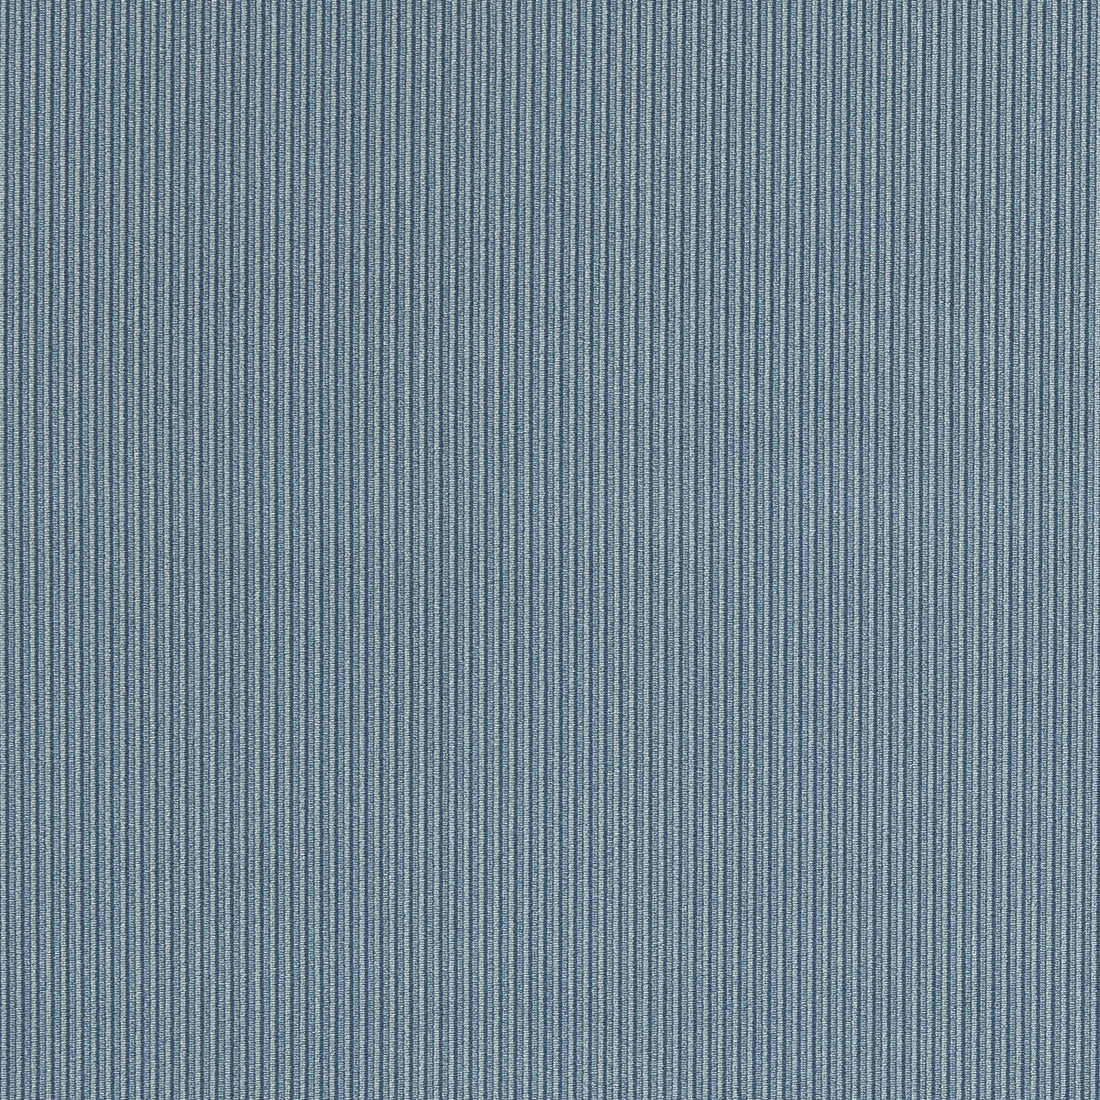 Ashdown fabric in indigo color - pattern F1688/05.CAC.0 - by Clarke And Clarke in the Whitworth collection